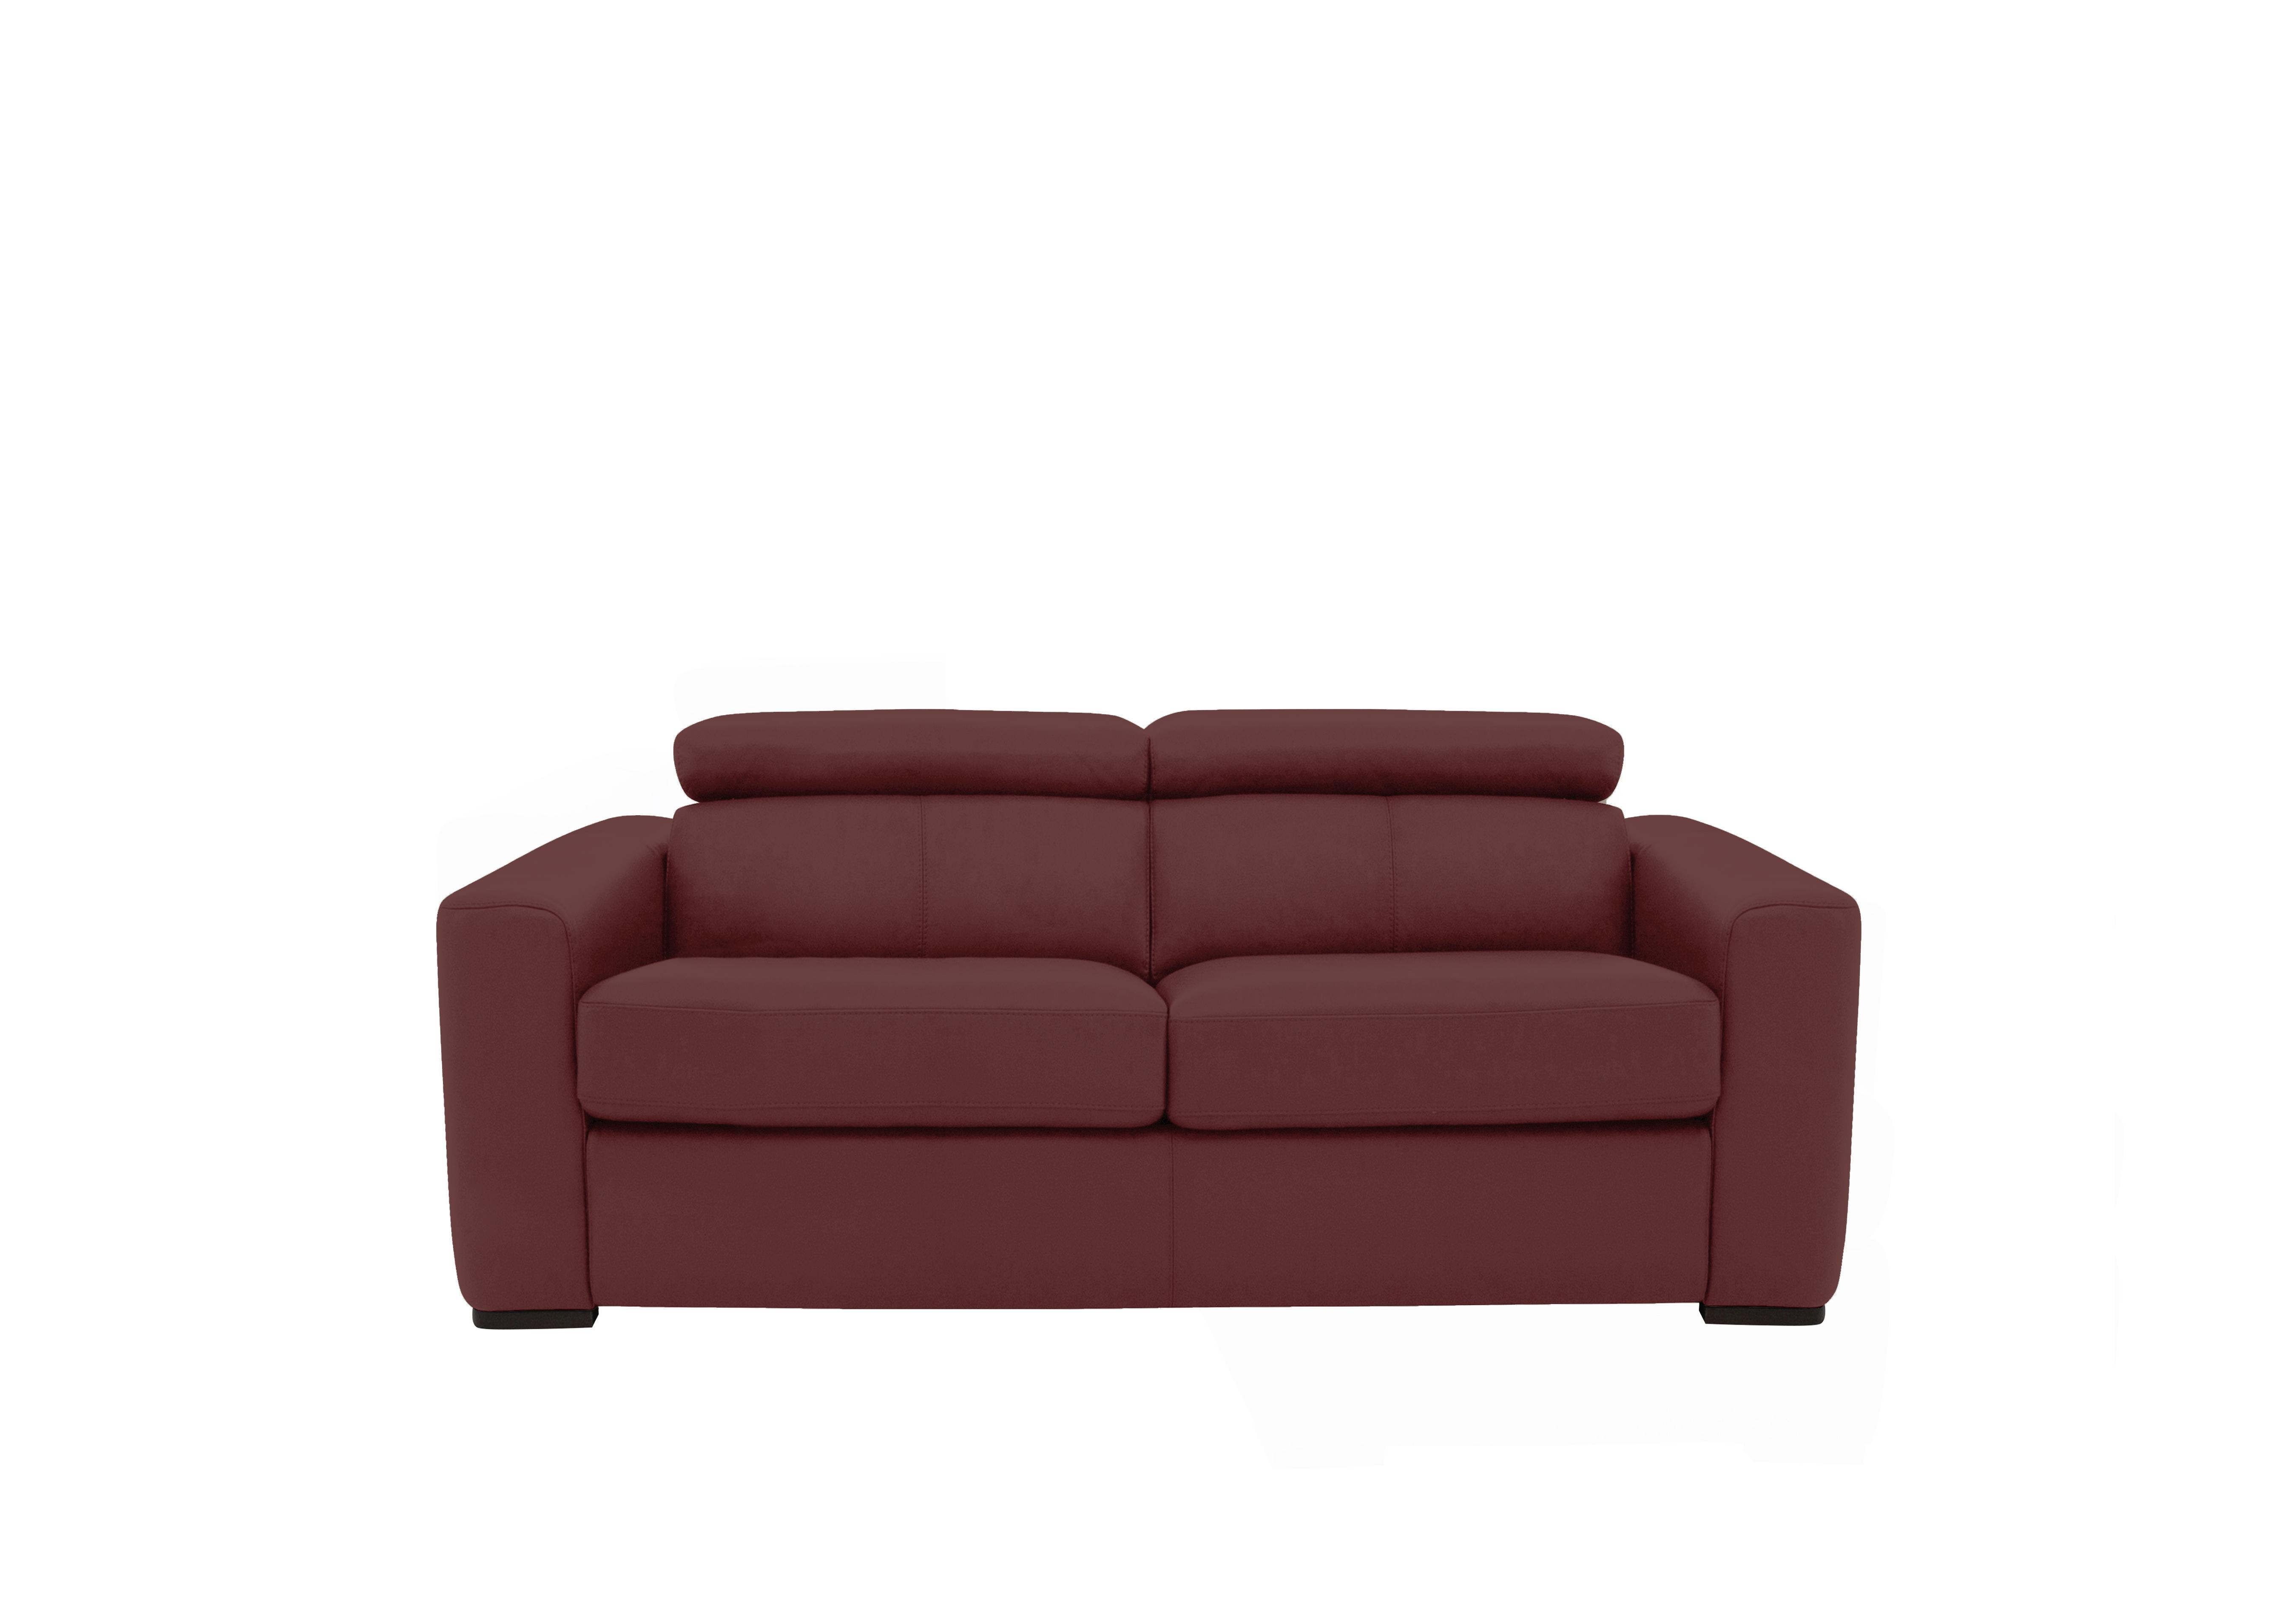 Infinity 2 Seater Leather Sofa in Bv-035c Deep Red on Furniture Village